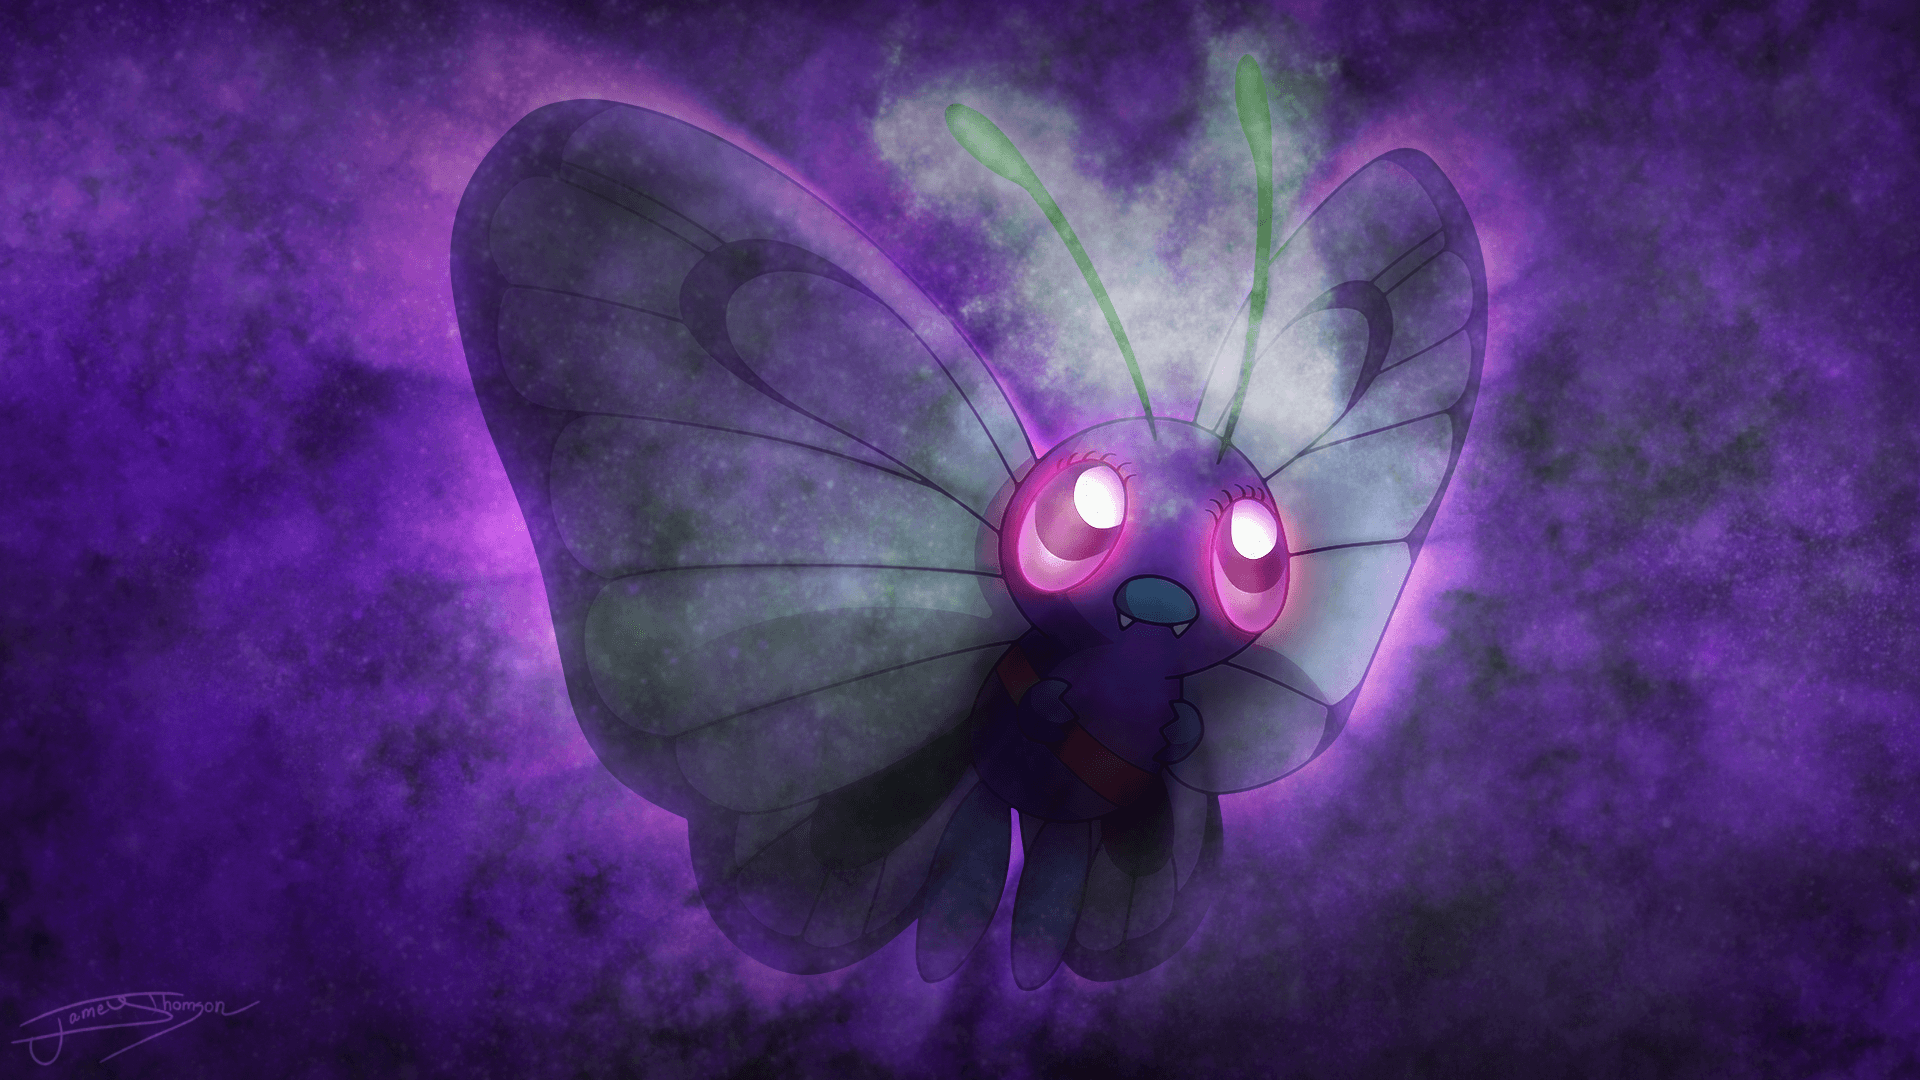 My Butterfree Liberty by Jamey